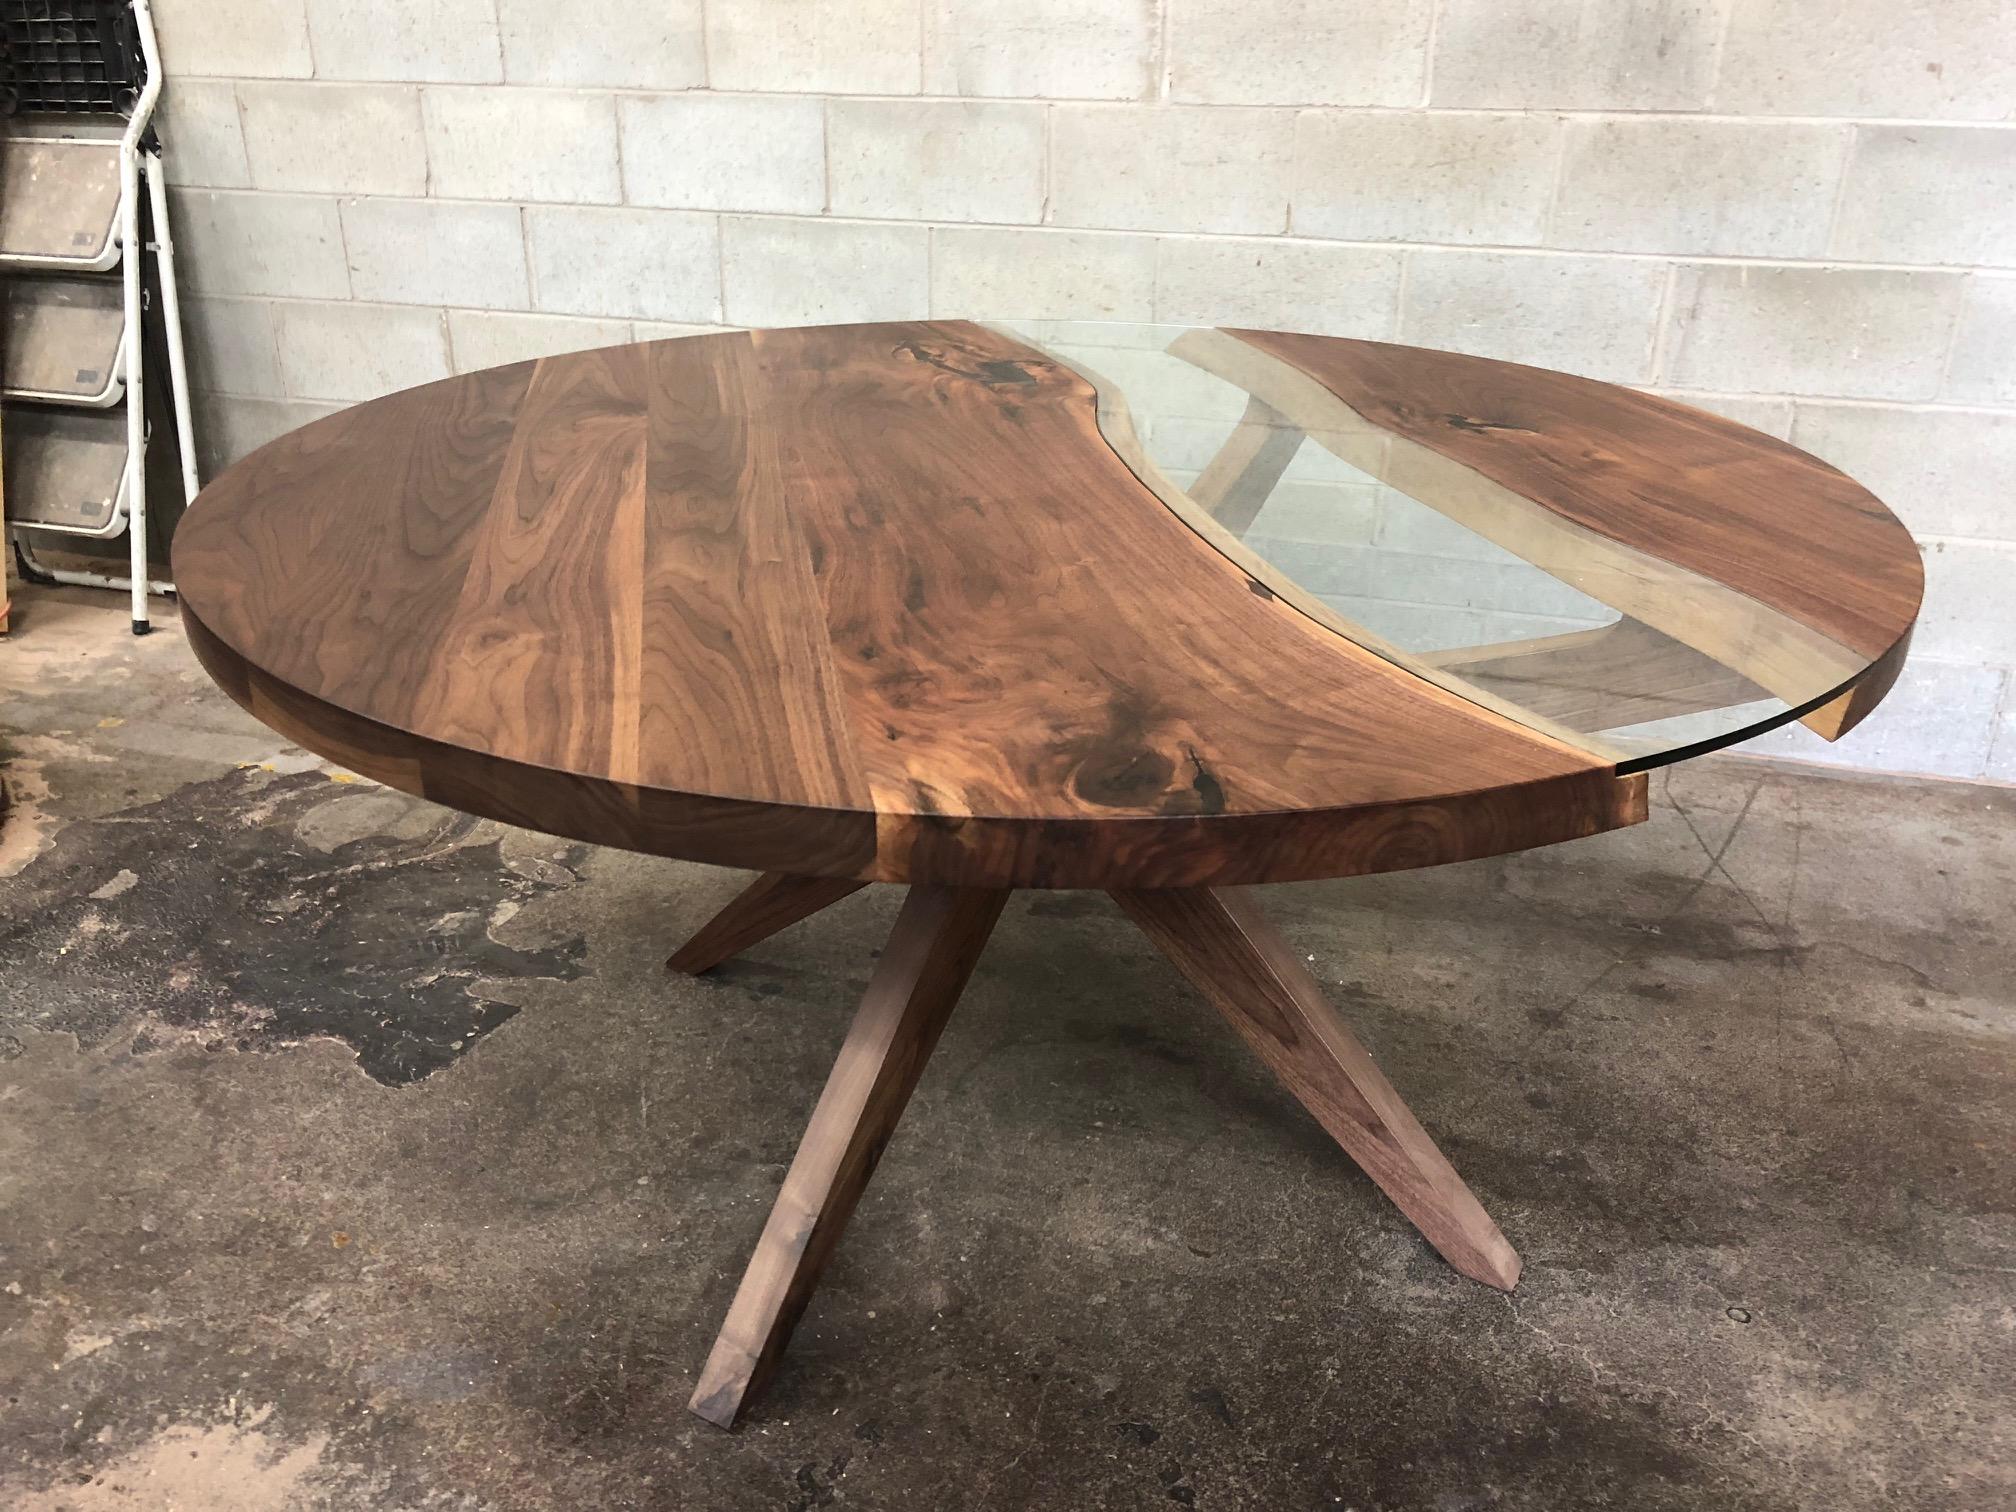 This round black walnut dining table on black walnut legs is the perfect nook table. It sits comfortably 4-5 people for a 66in diameter and more depending on the size. Each table is different because of the live edge of the slabs. We use tempered